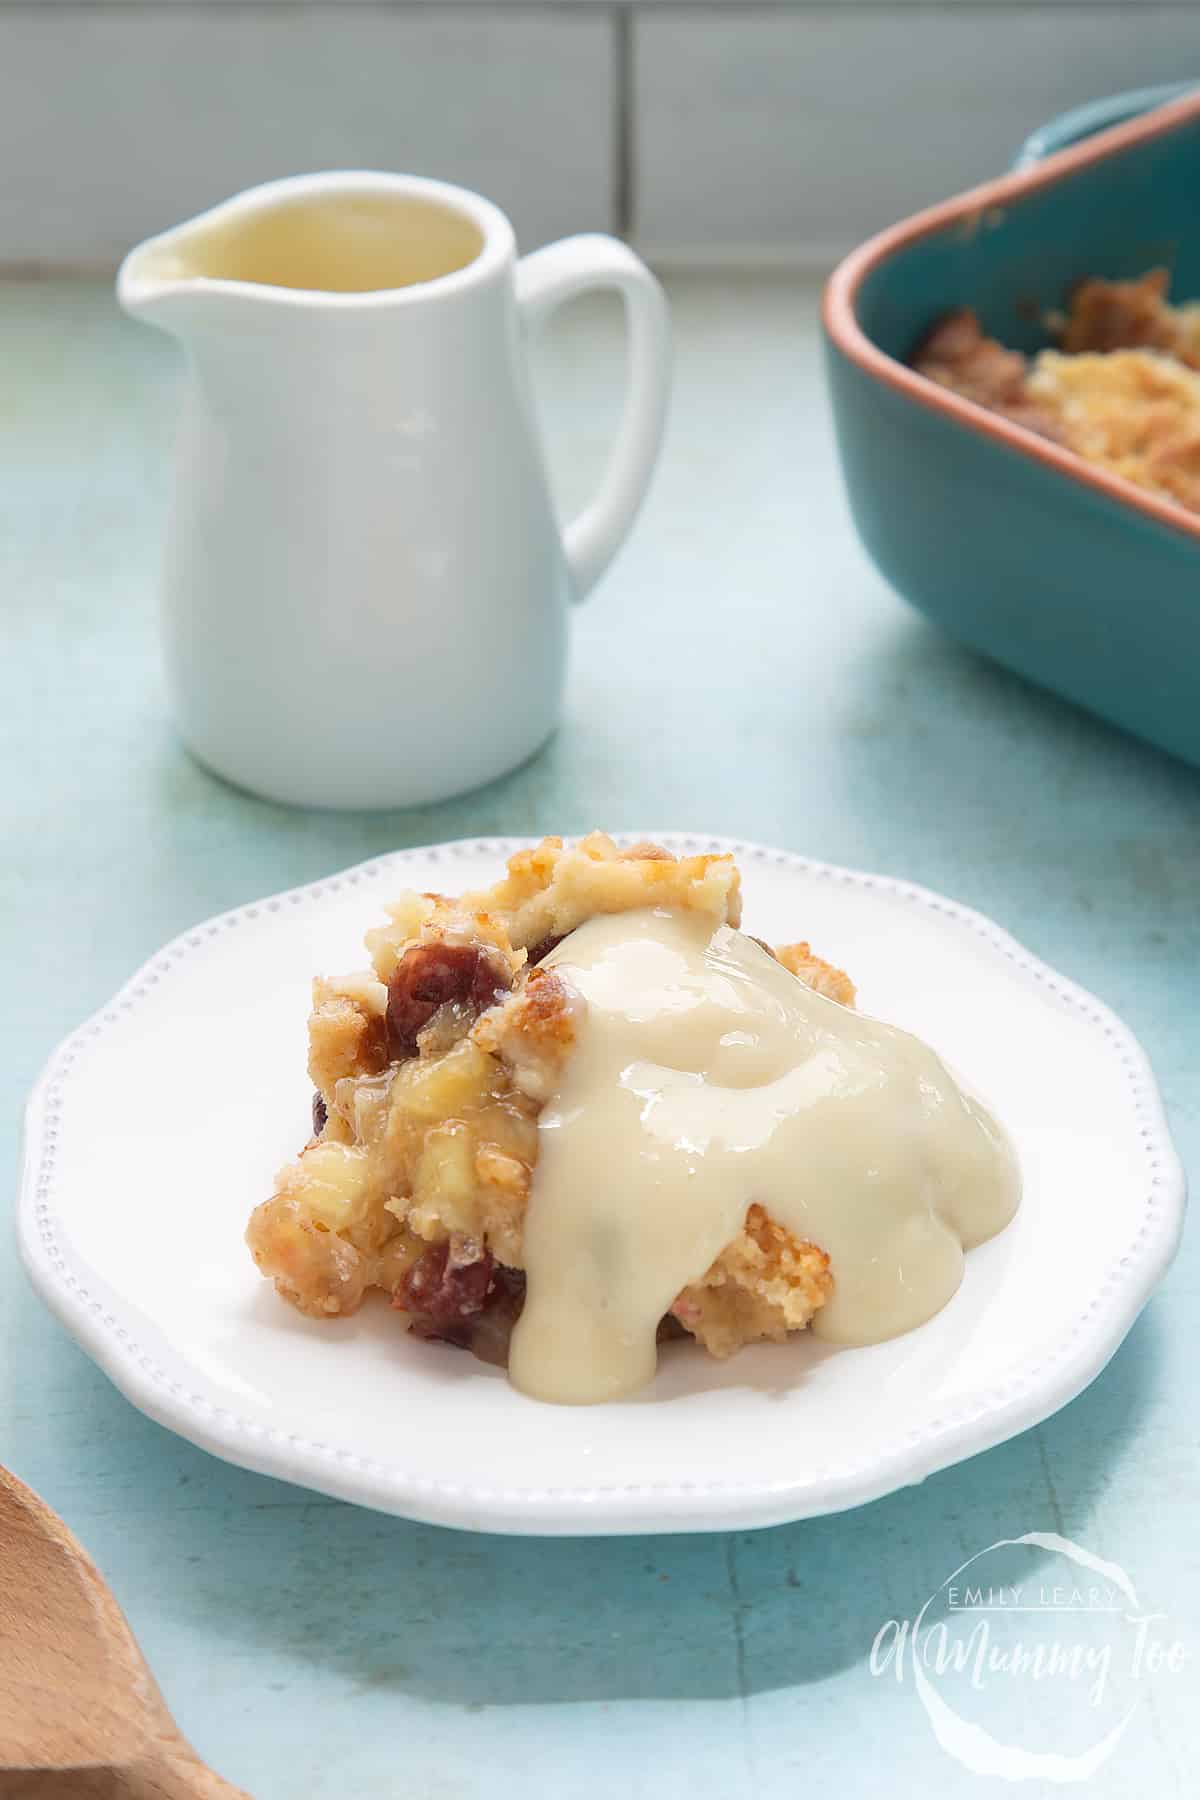 A berry crumble covered with vegan custard on a white plate. A small jug of vegan custard and a tray of crumble is shown in the background